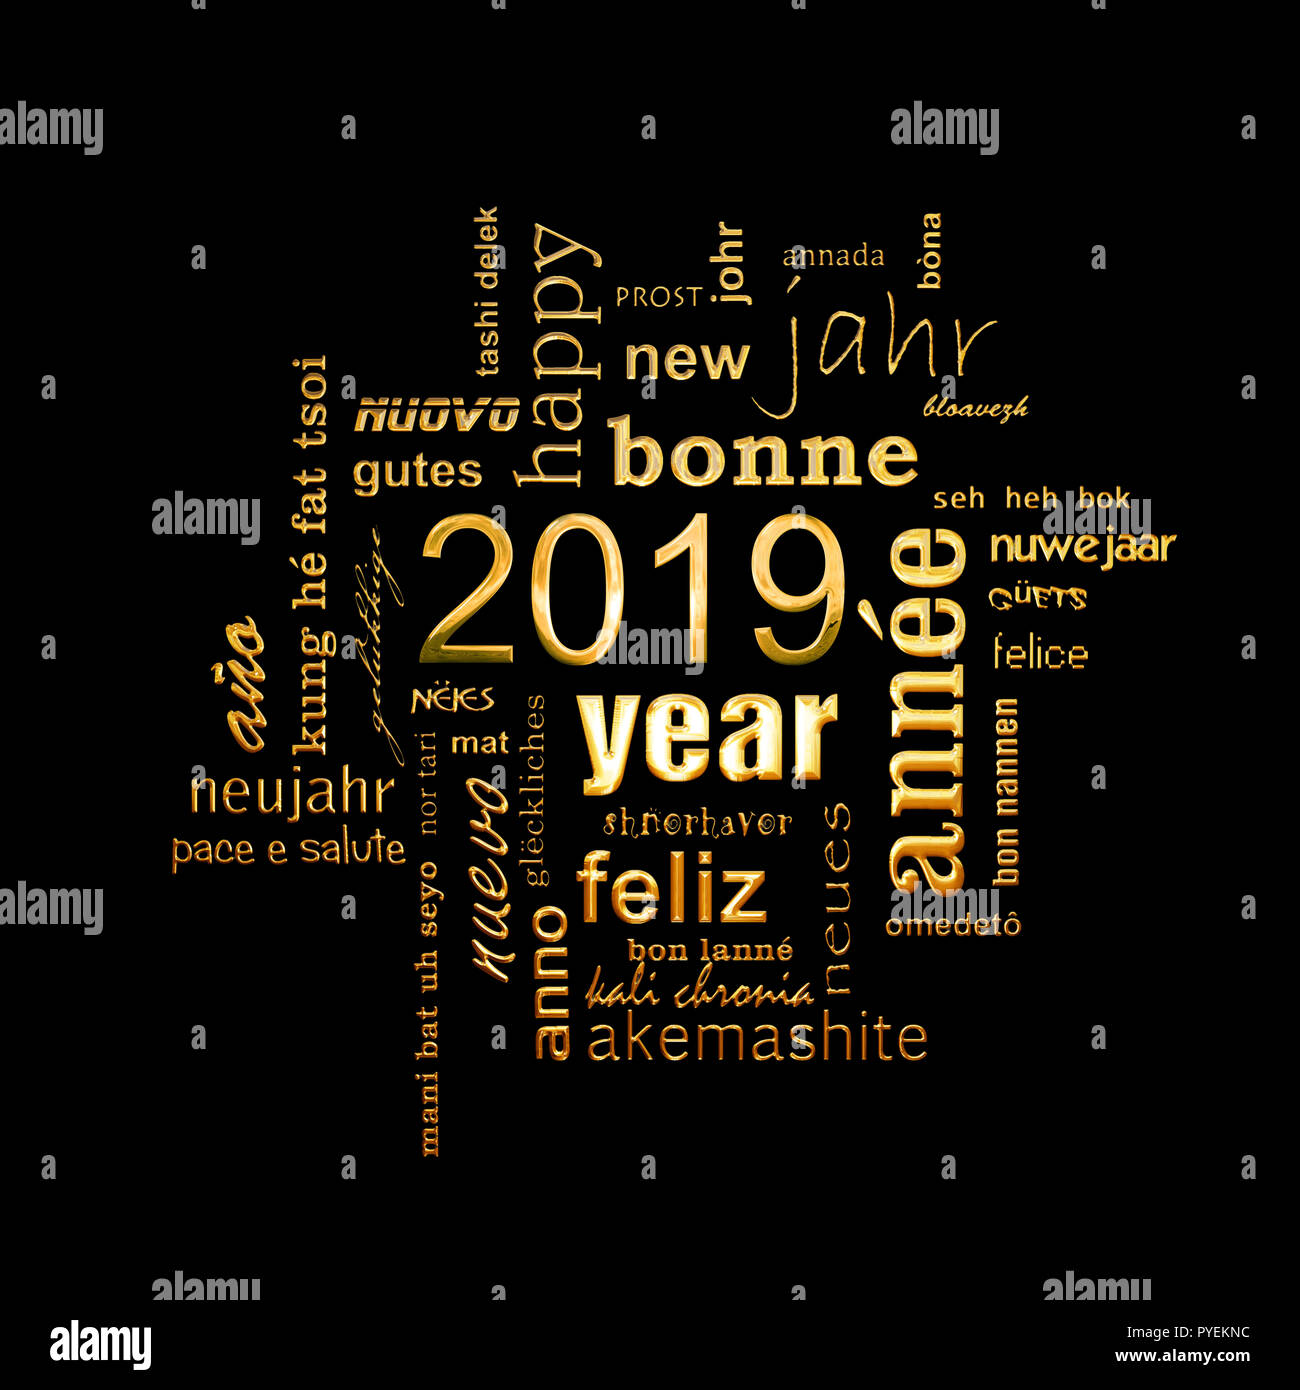 New year greeting card 2019. Multilingual word cloud, golden letters on black background Stock Photo